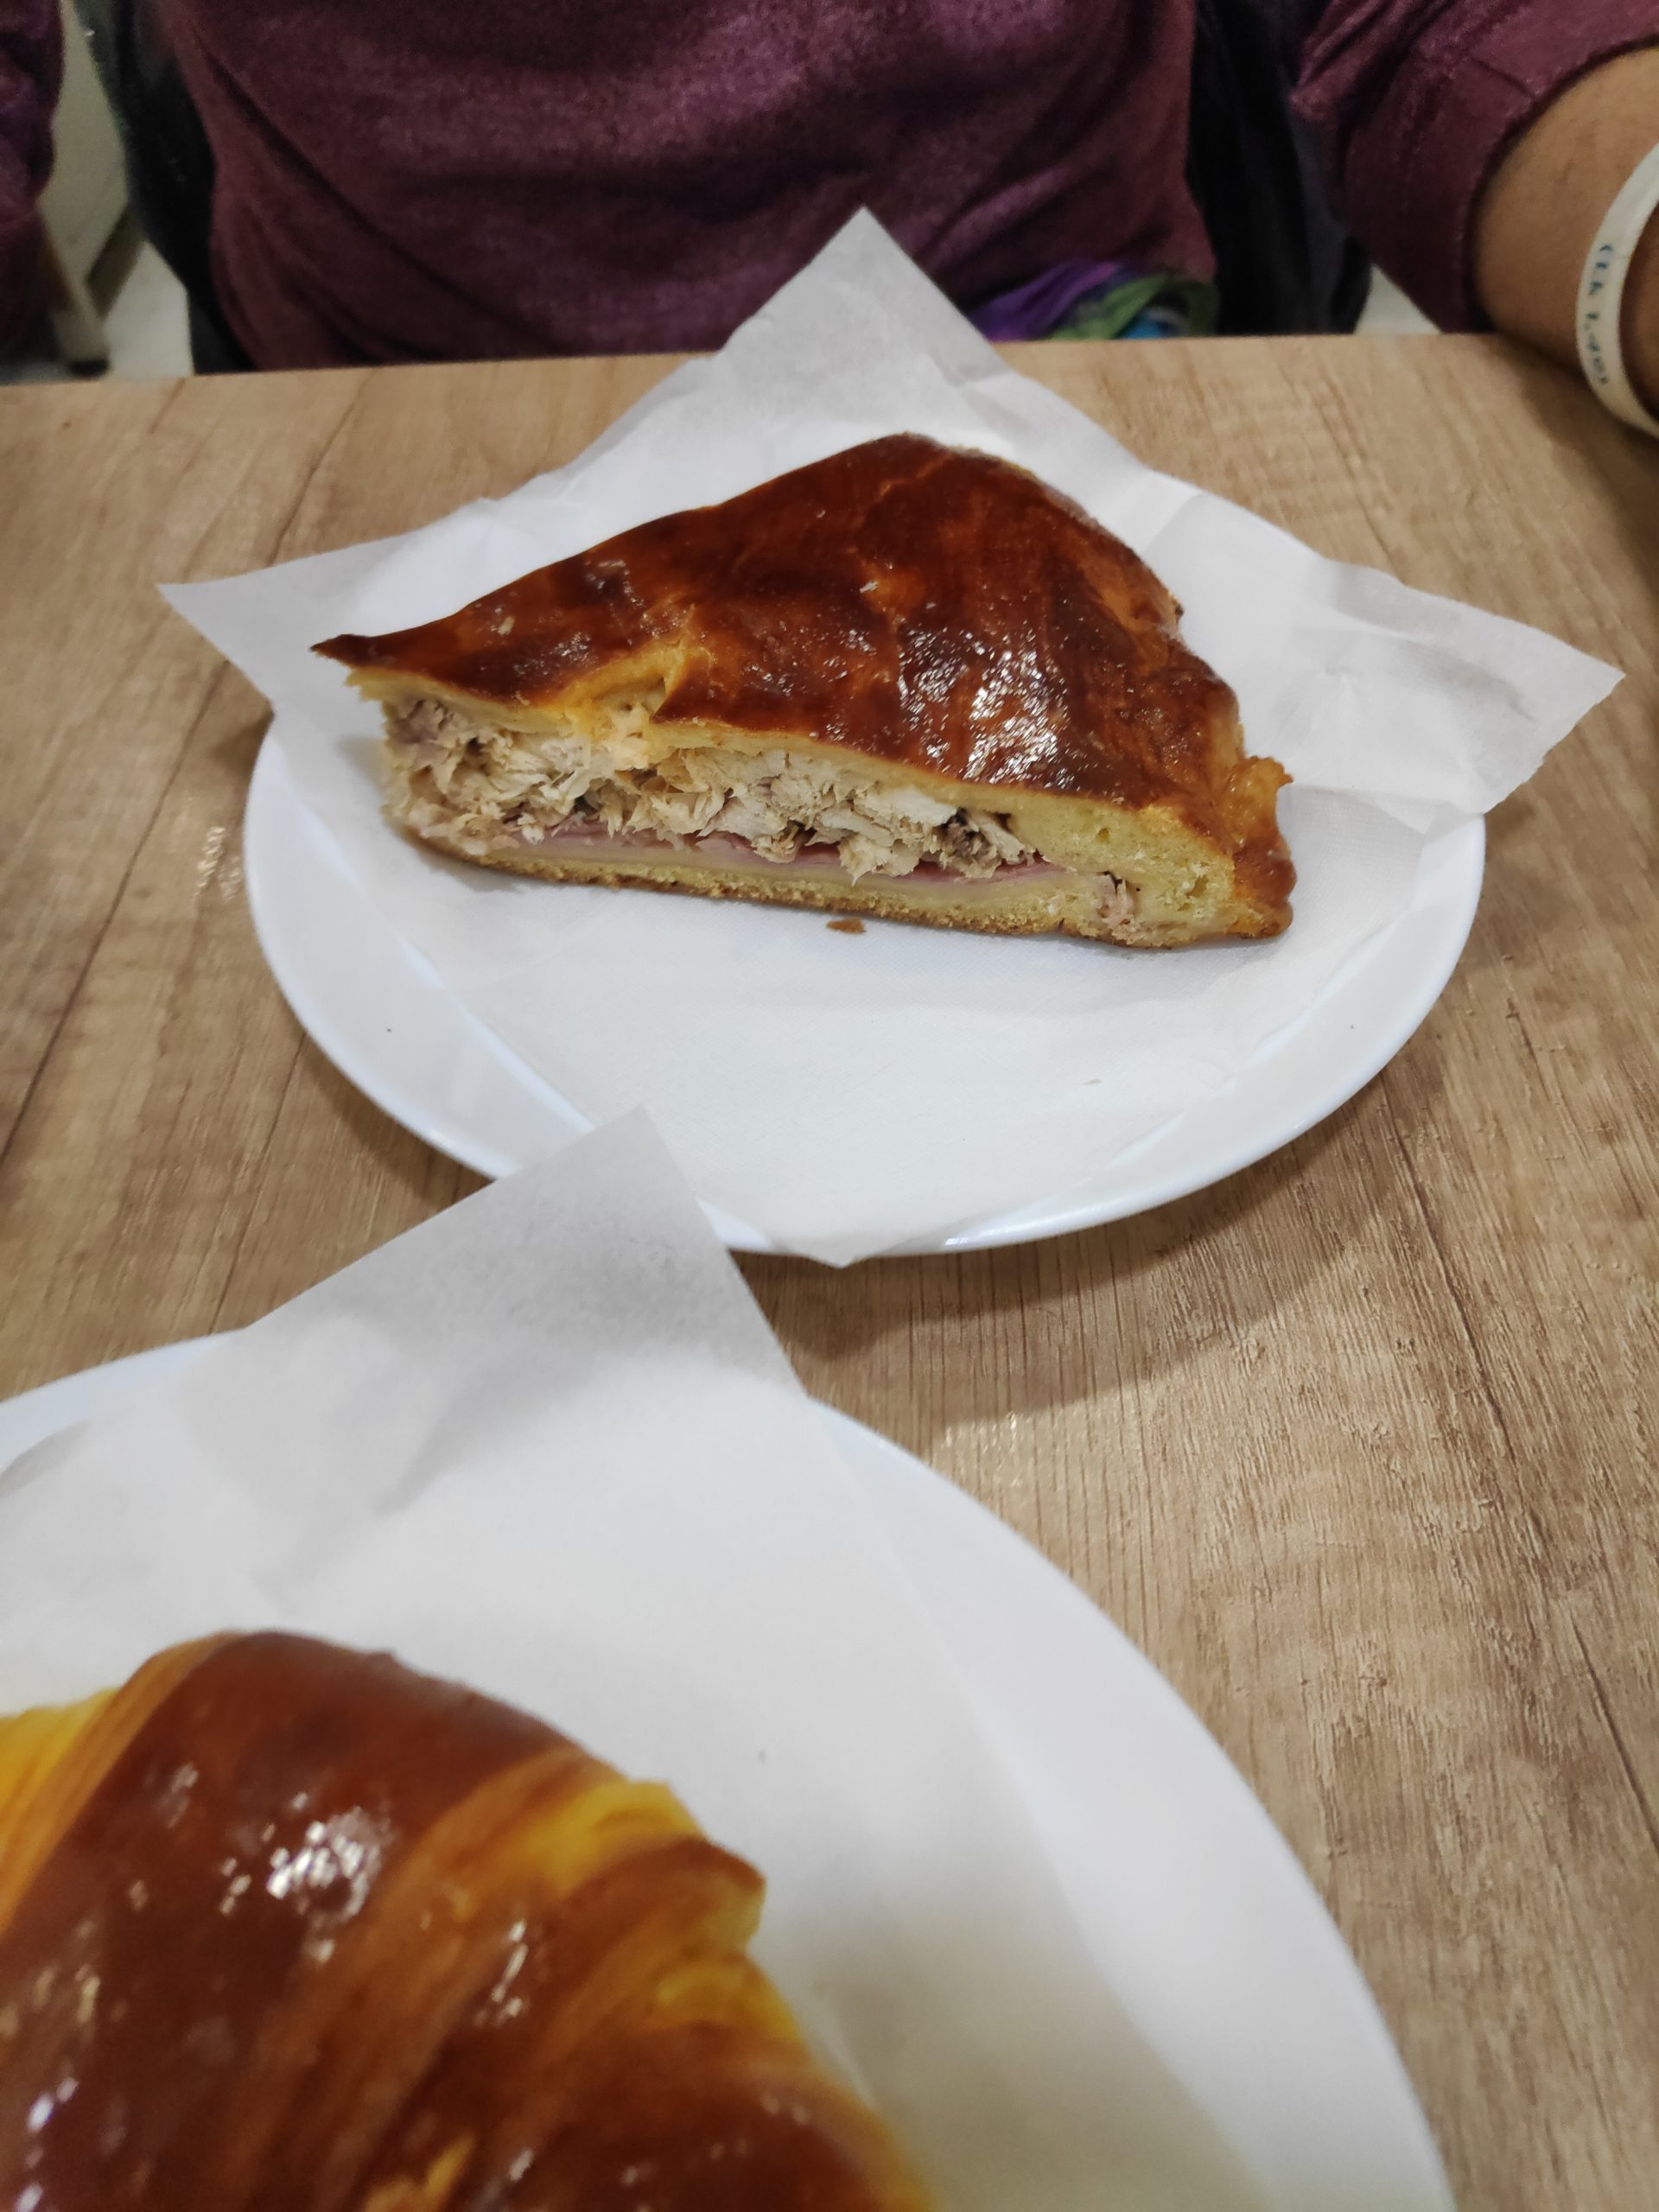 Some weird variation of burek, that is traditional to Porto.